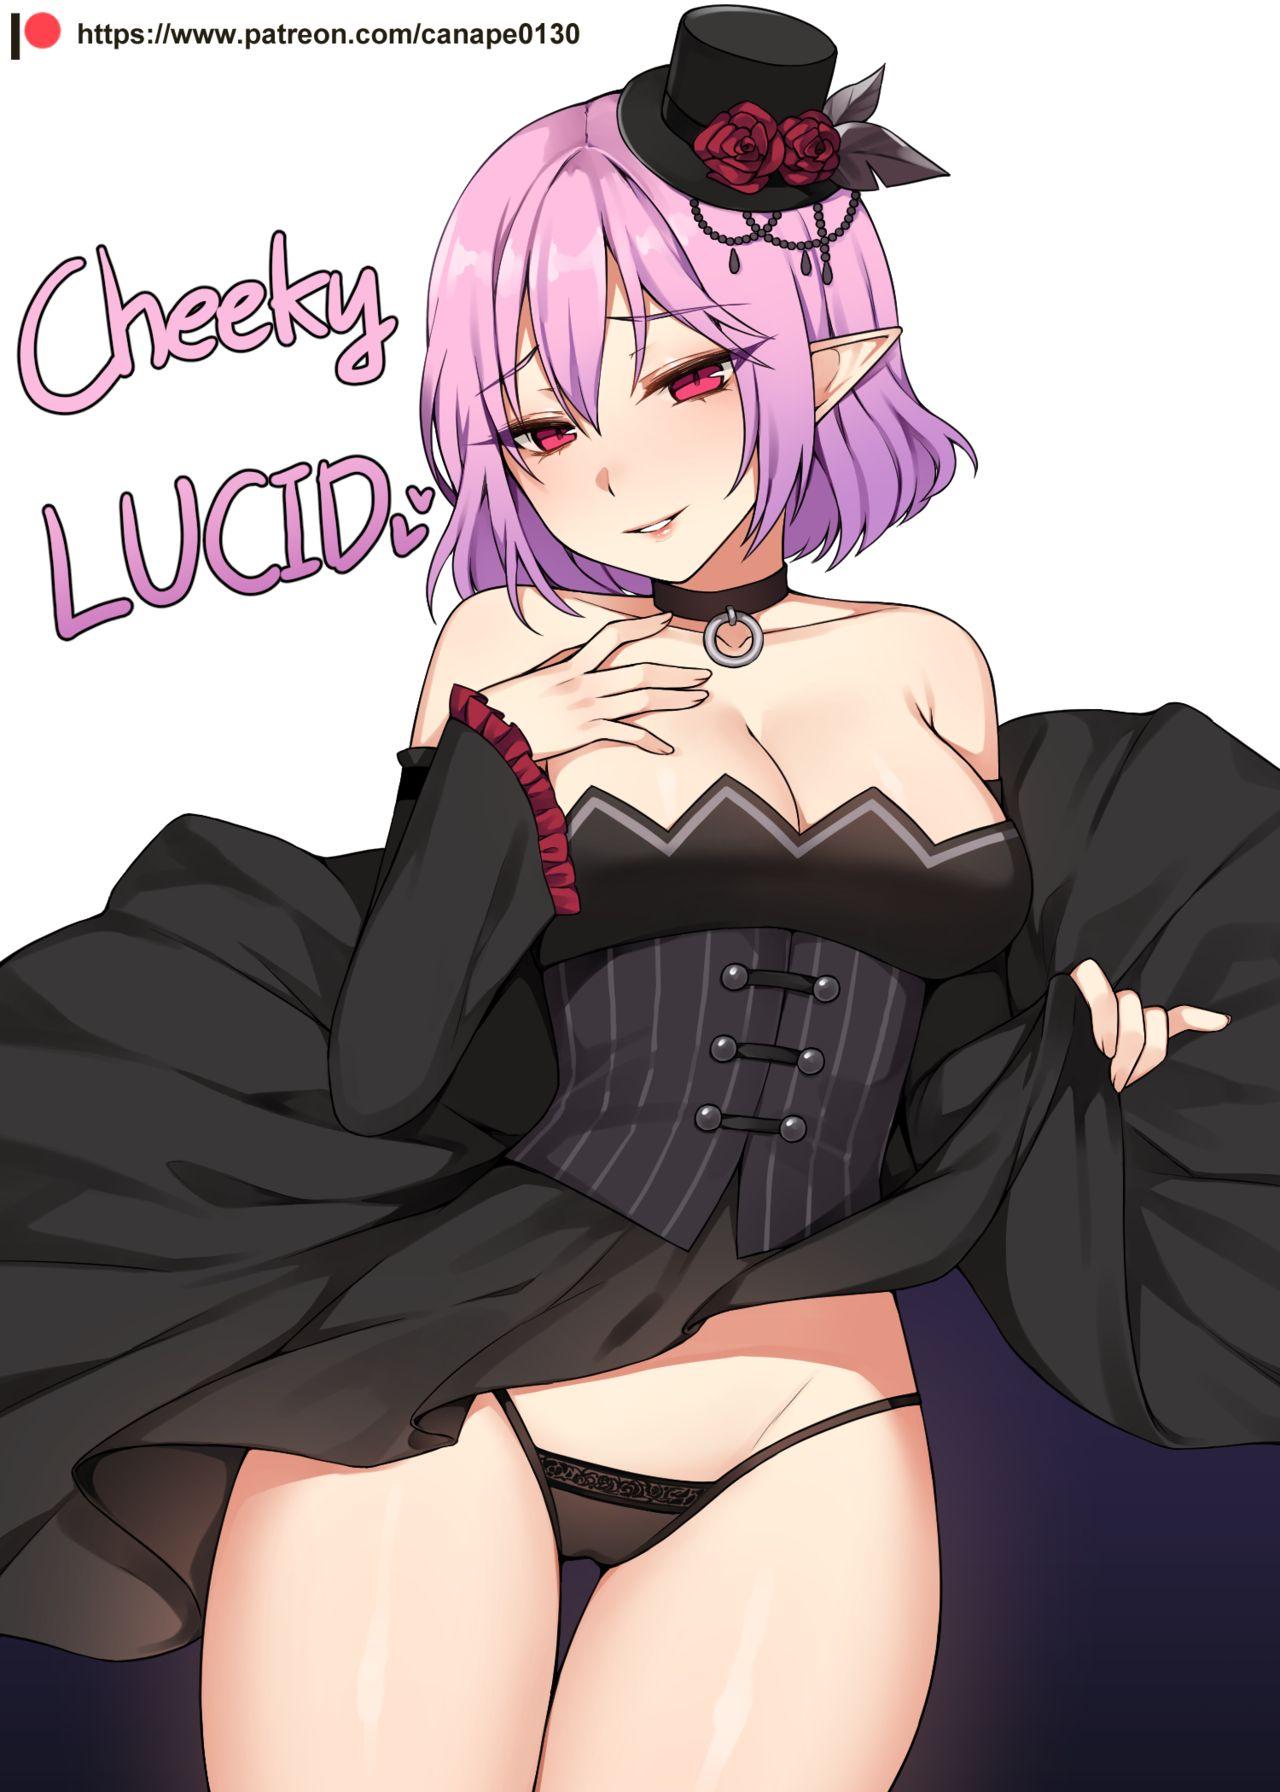 Ex Girlfriend Cheeky LUCID - Maplestory White Chick - Picture 1